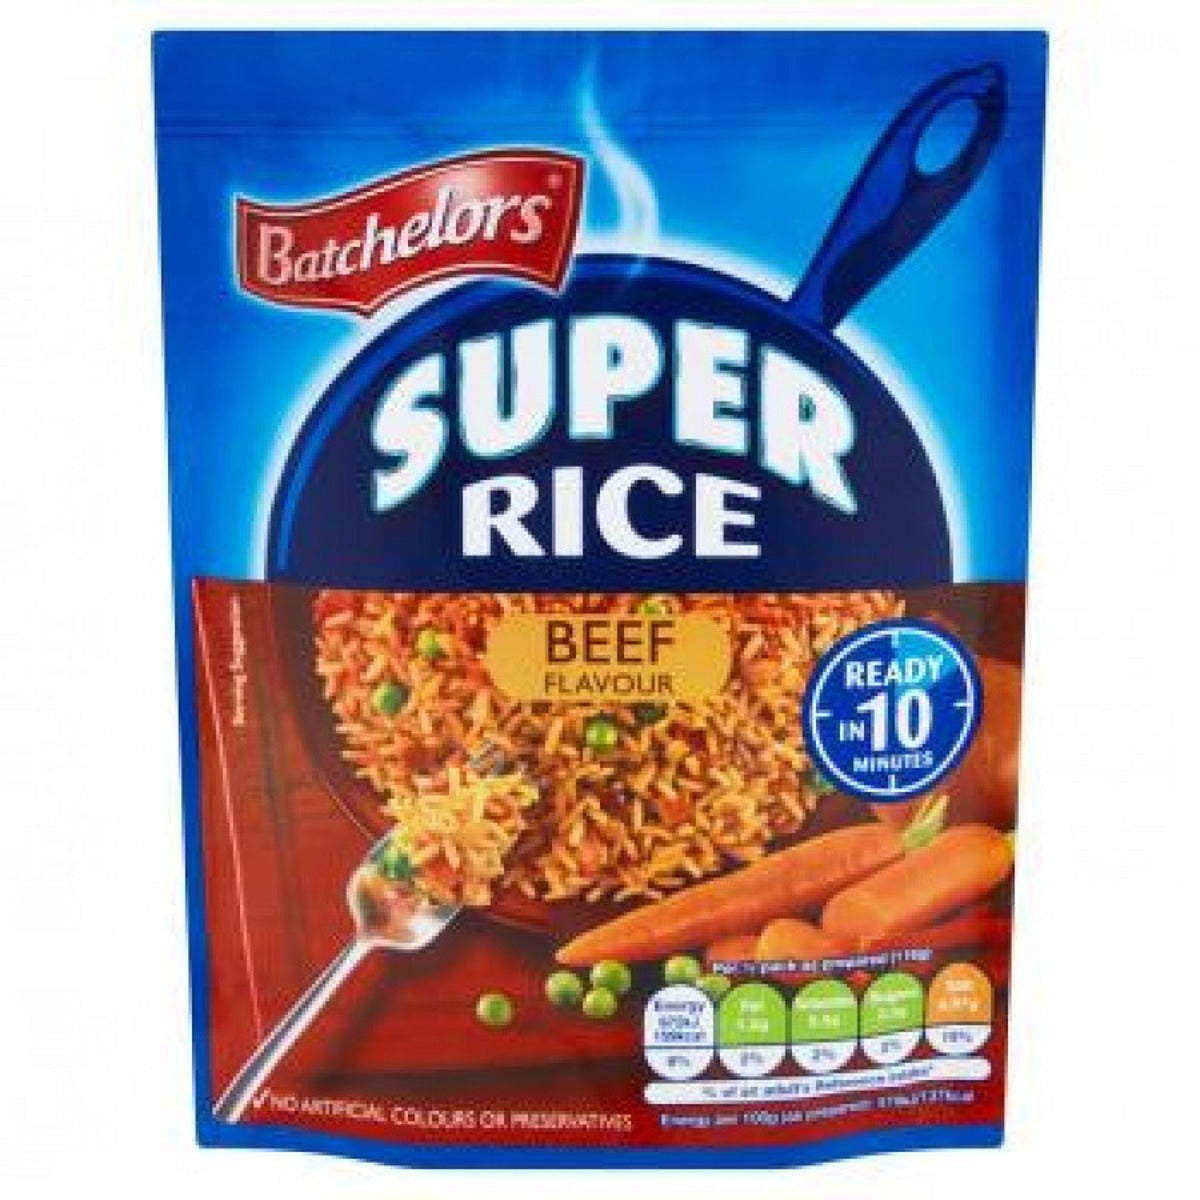 Batchelors - Super Rice Beef Flavour 90g - Continental Food Store